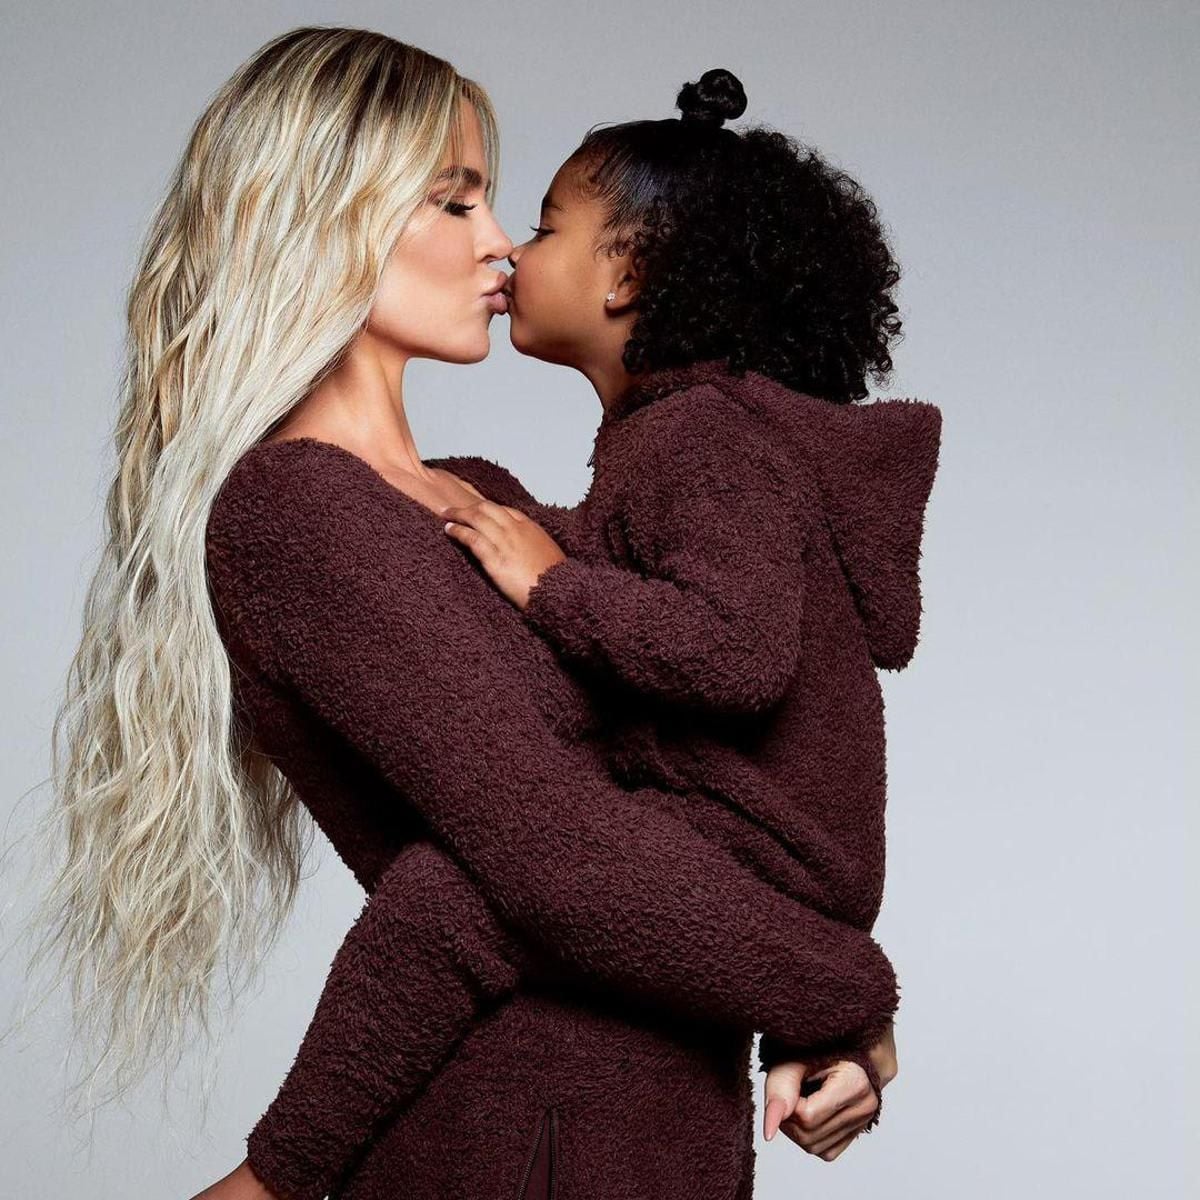 Khloe Kardashian family Christmas pictures with True